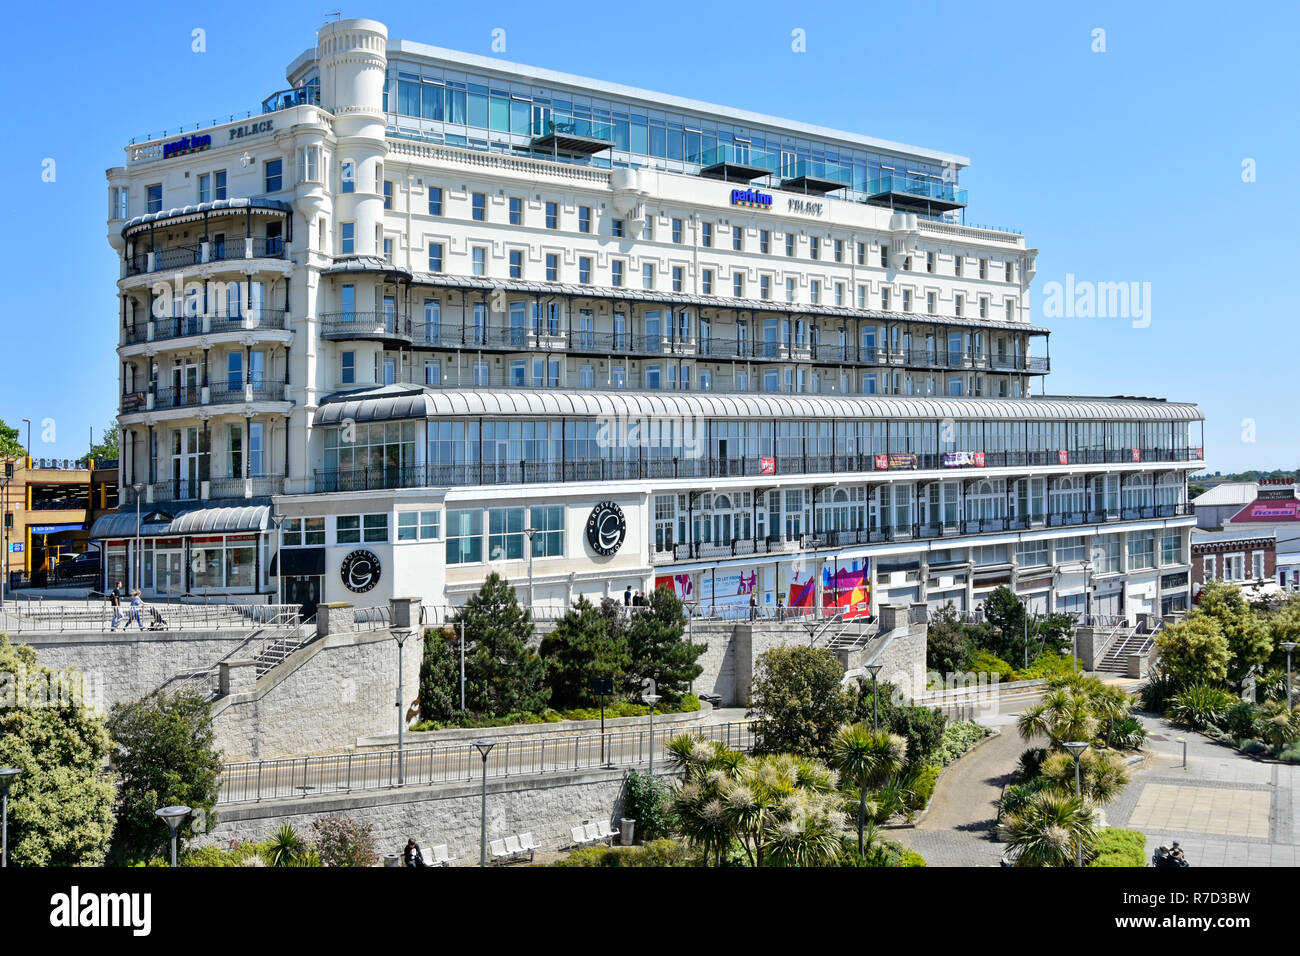 Southend on Sea landmark parkinn Palace hotel building by Radisson with casino overlooking seafront seaside resort town of Southend Essex England UK Stock Photo